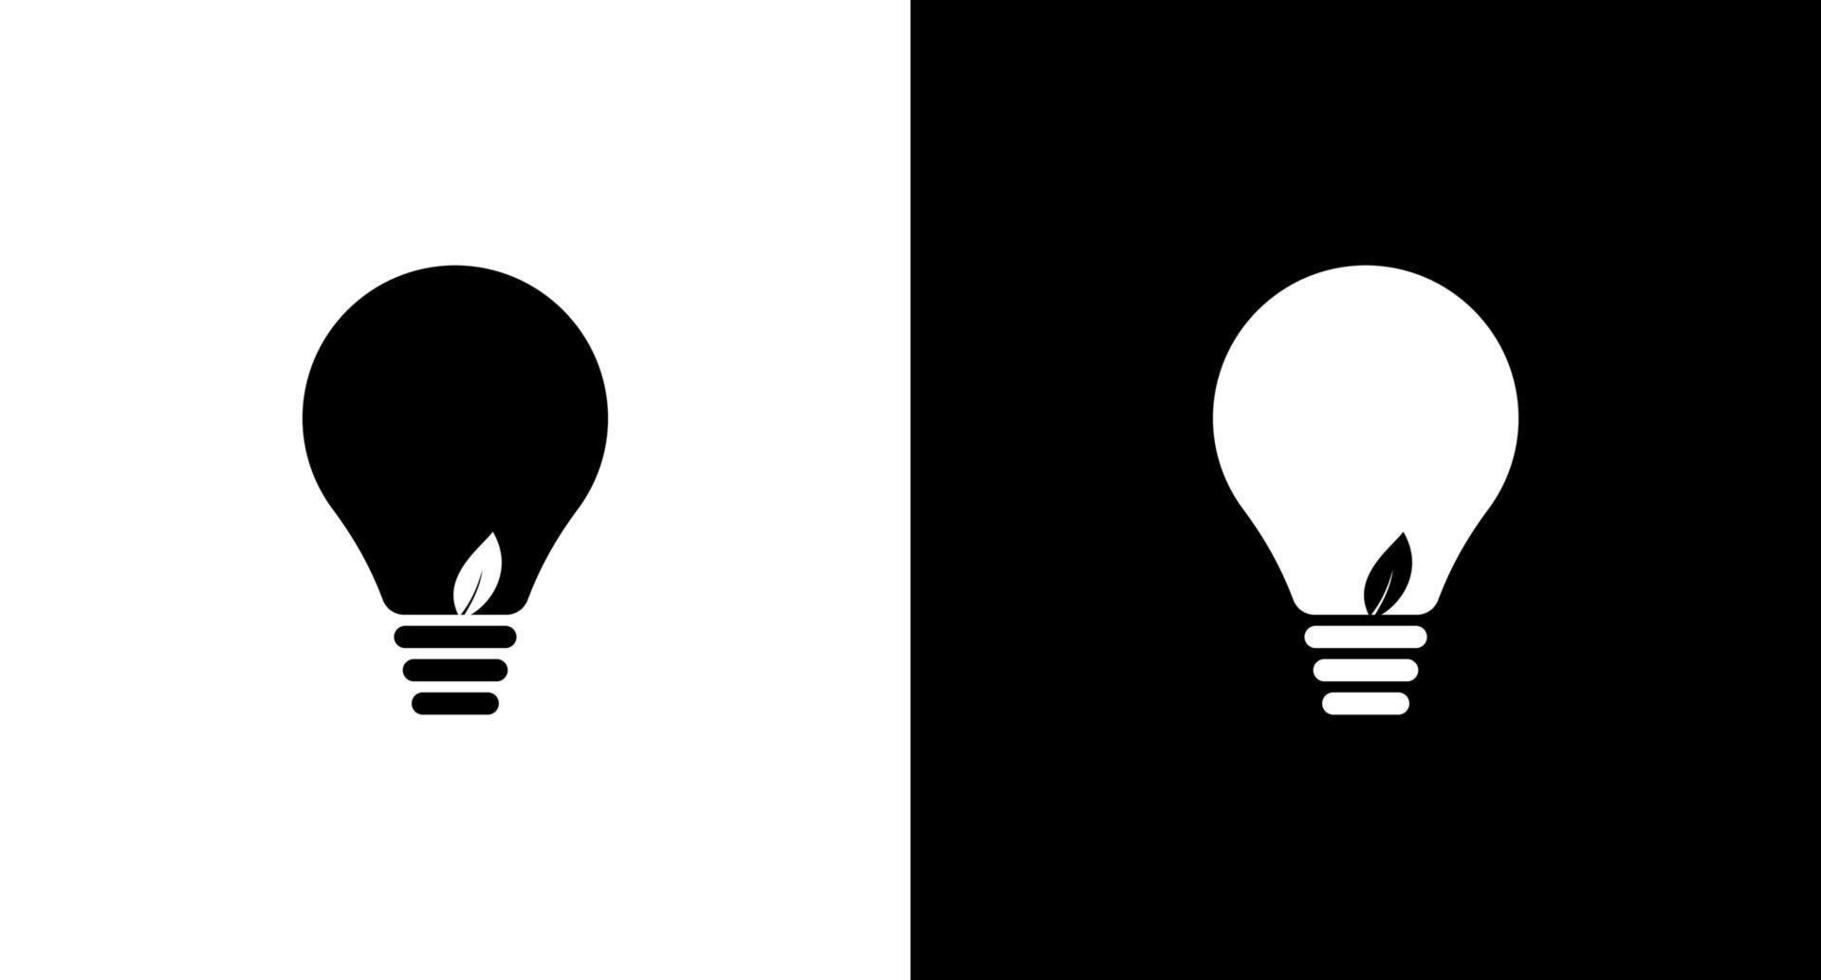 Lamp logo light bulb with leaf inspiration ideas icon illustration style Designs templates vector